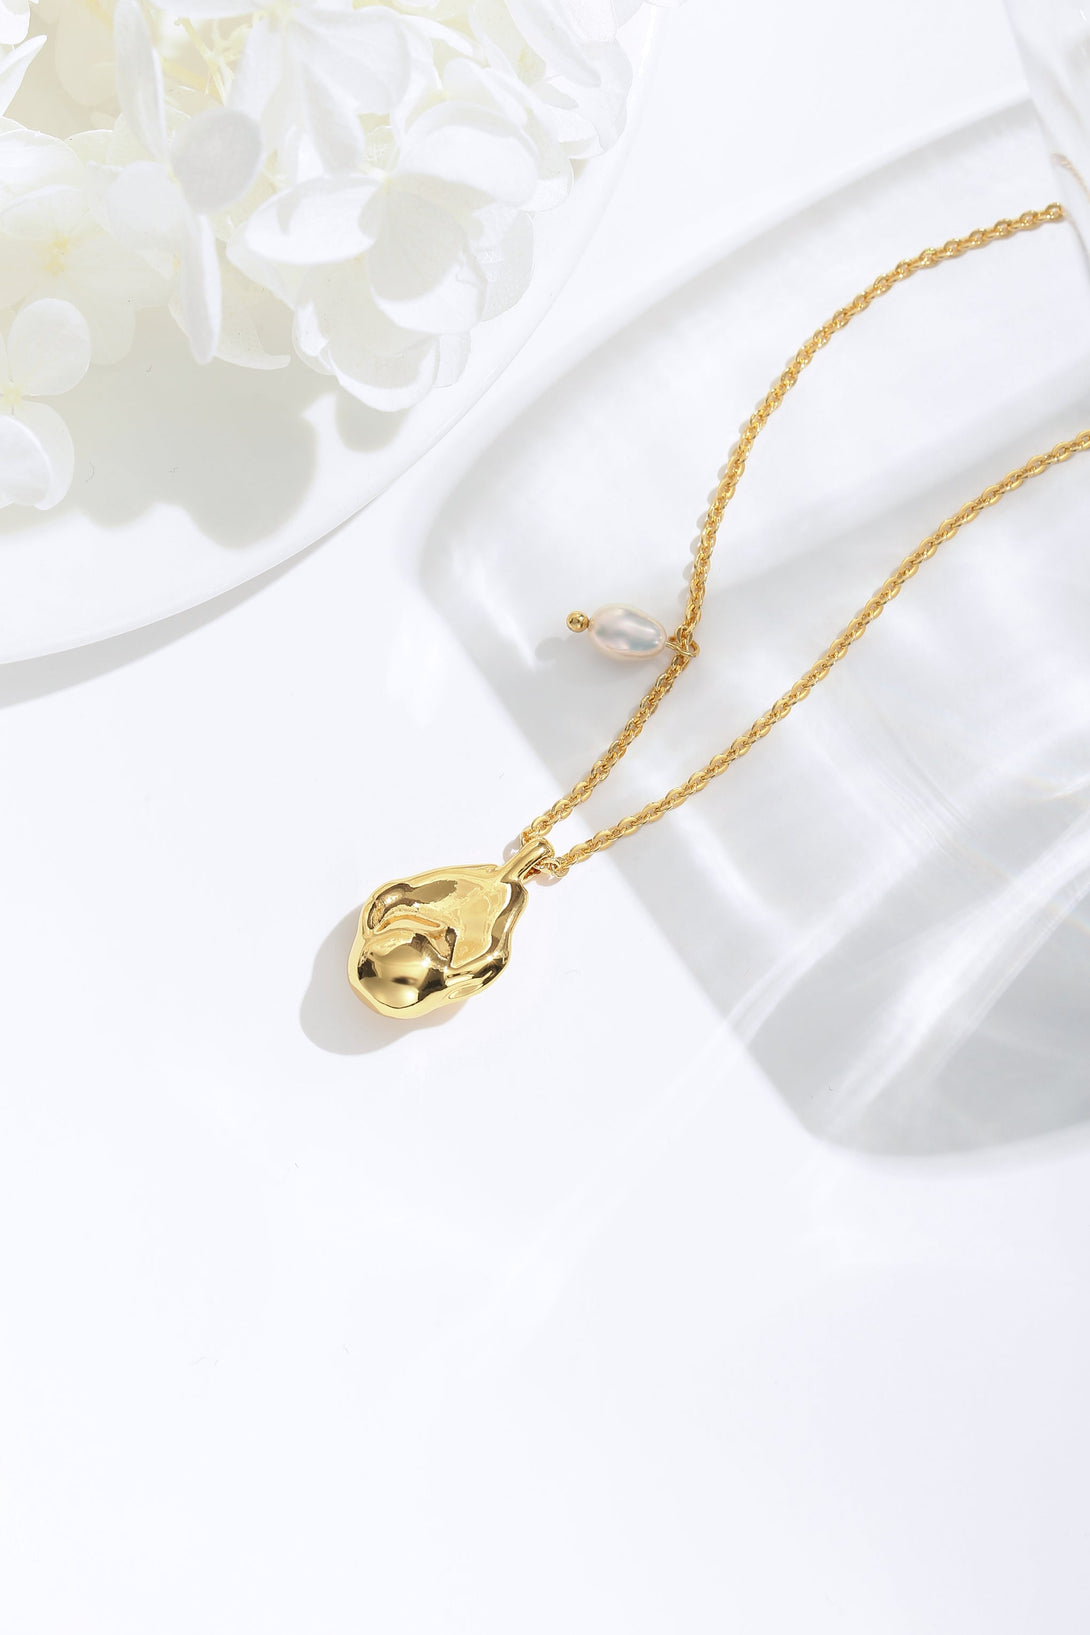 Gold Baroque Pendant and Pearl Necklace - Classicharms